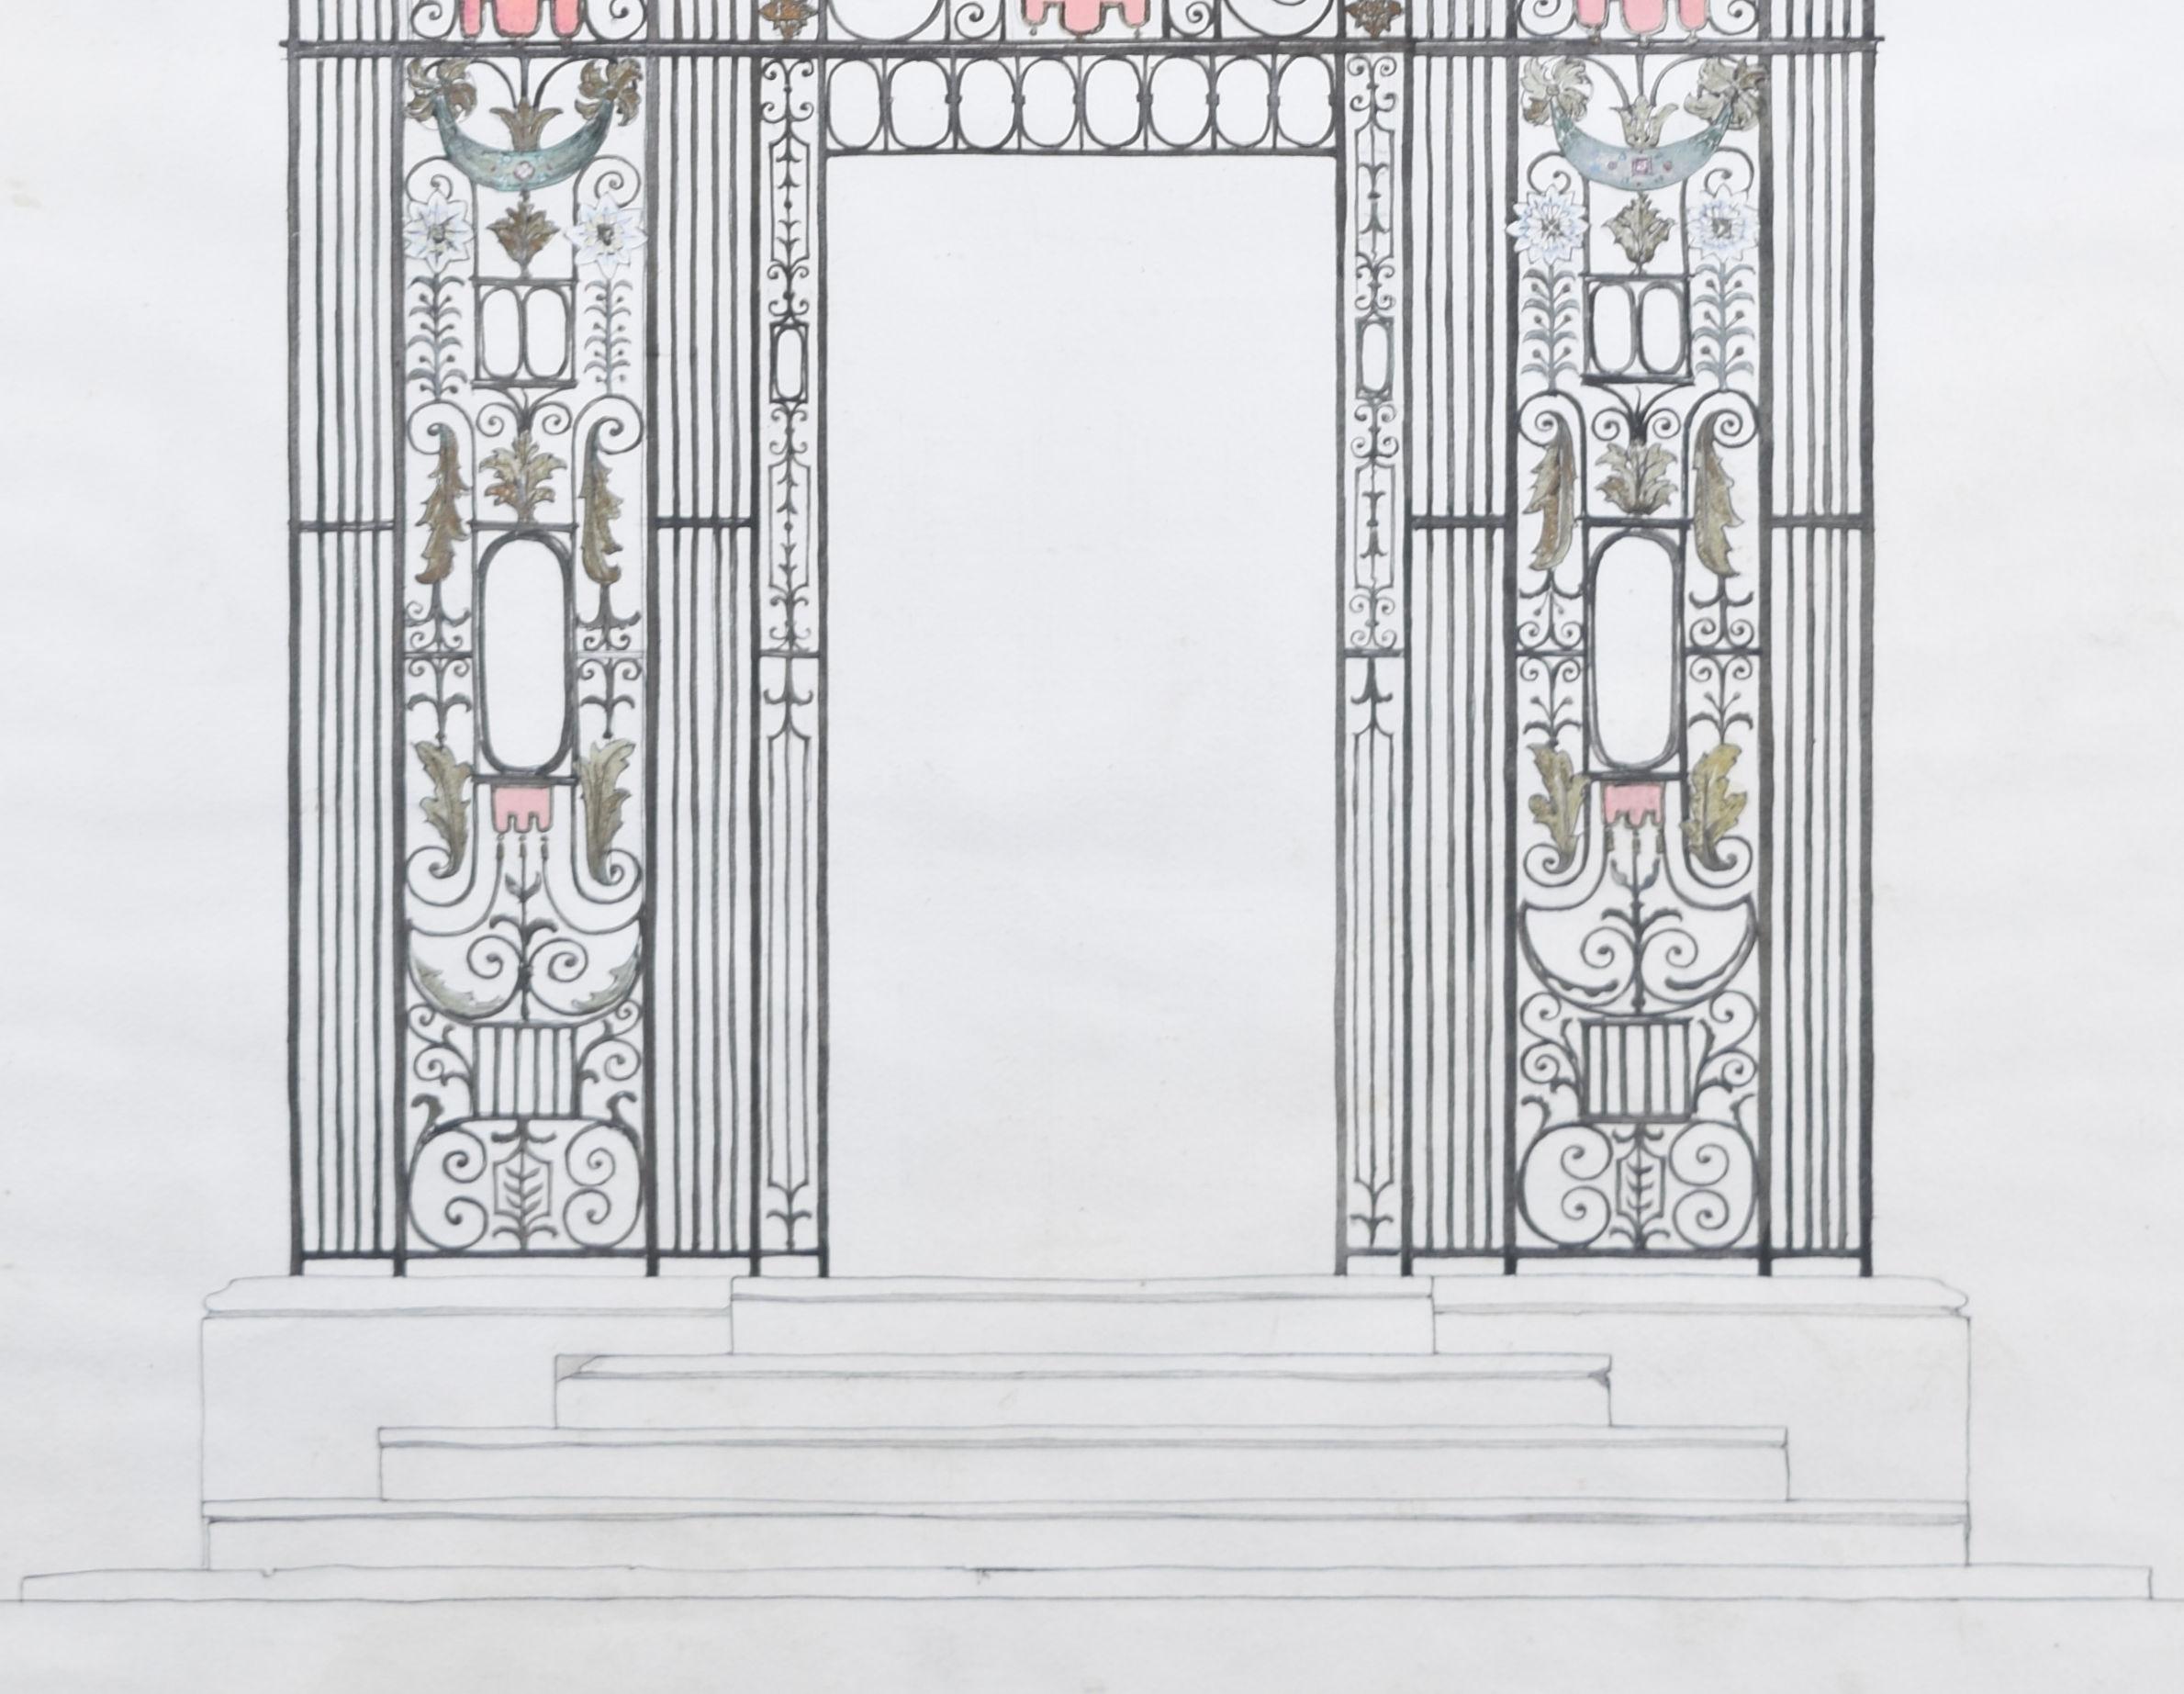 Design for 'Bird Cage' Arbour, Melbourne Hall, Derbyshire by Louis Osman FRIBA For Sale 3